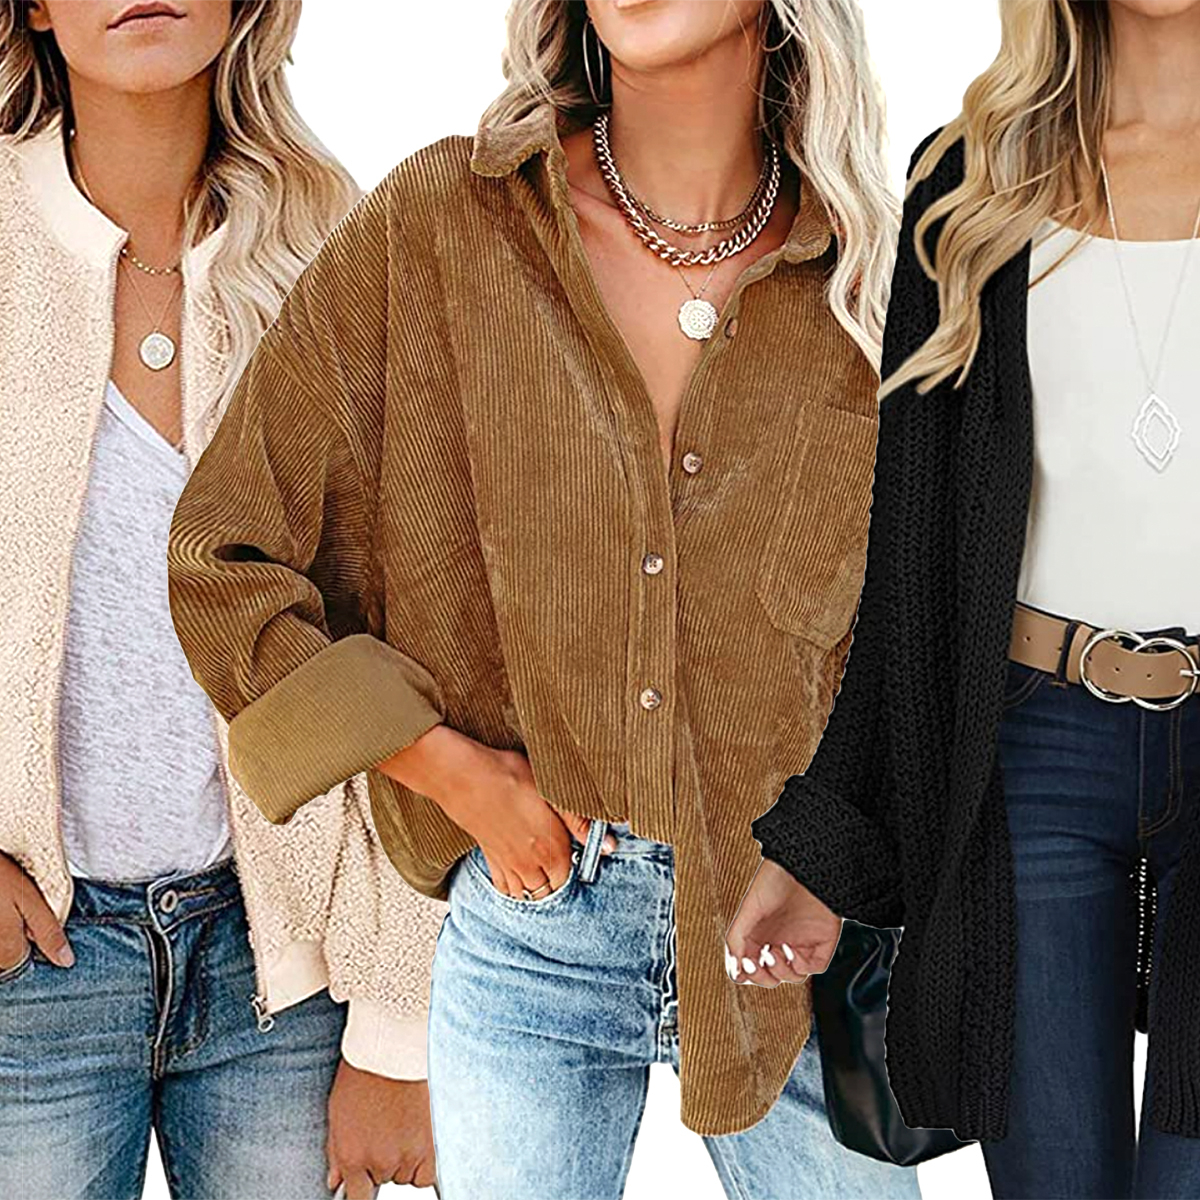 15 Can't-Miss Under $50 Deals From 's Fall Fashion Sale